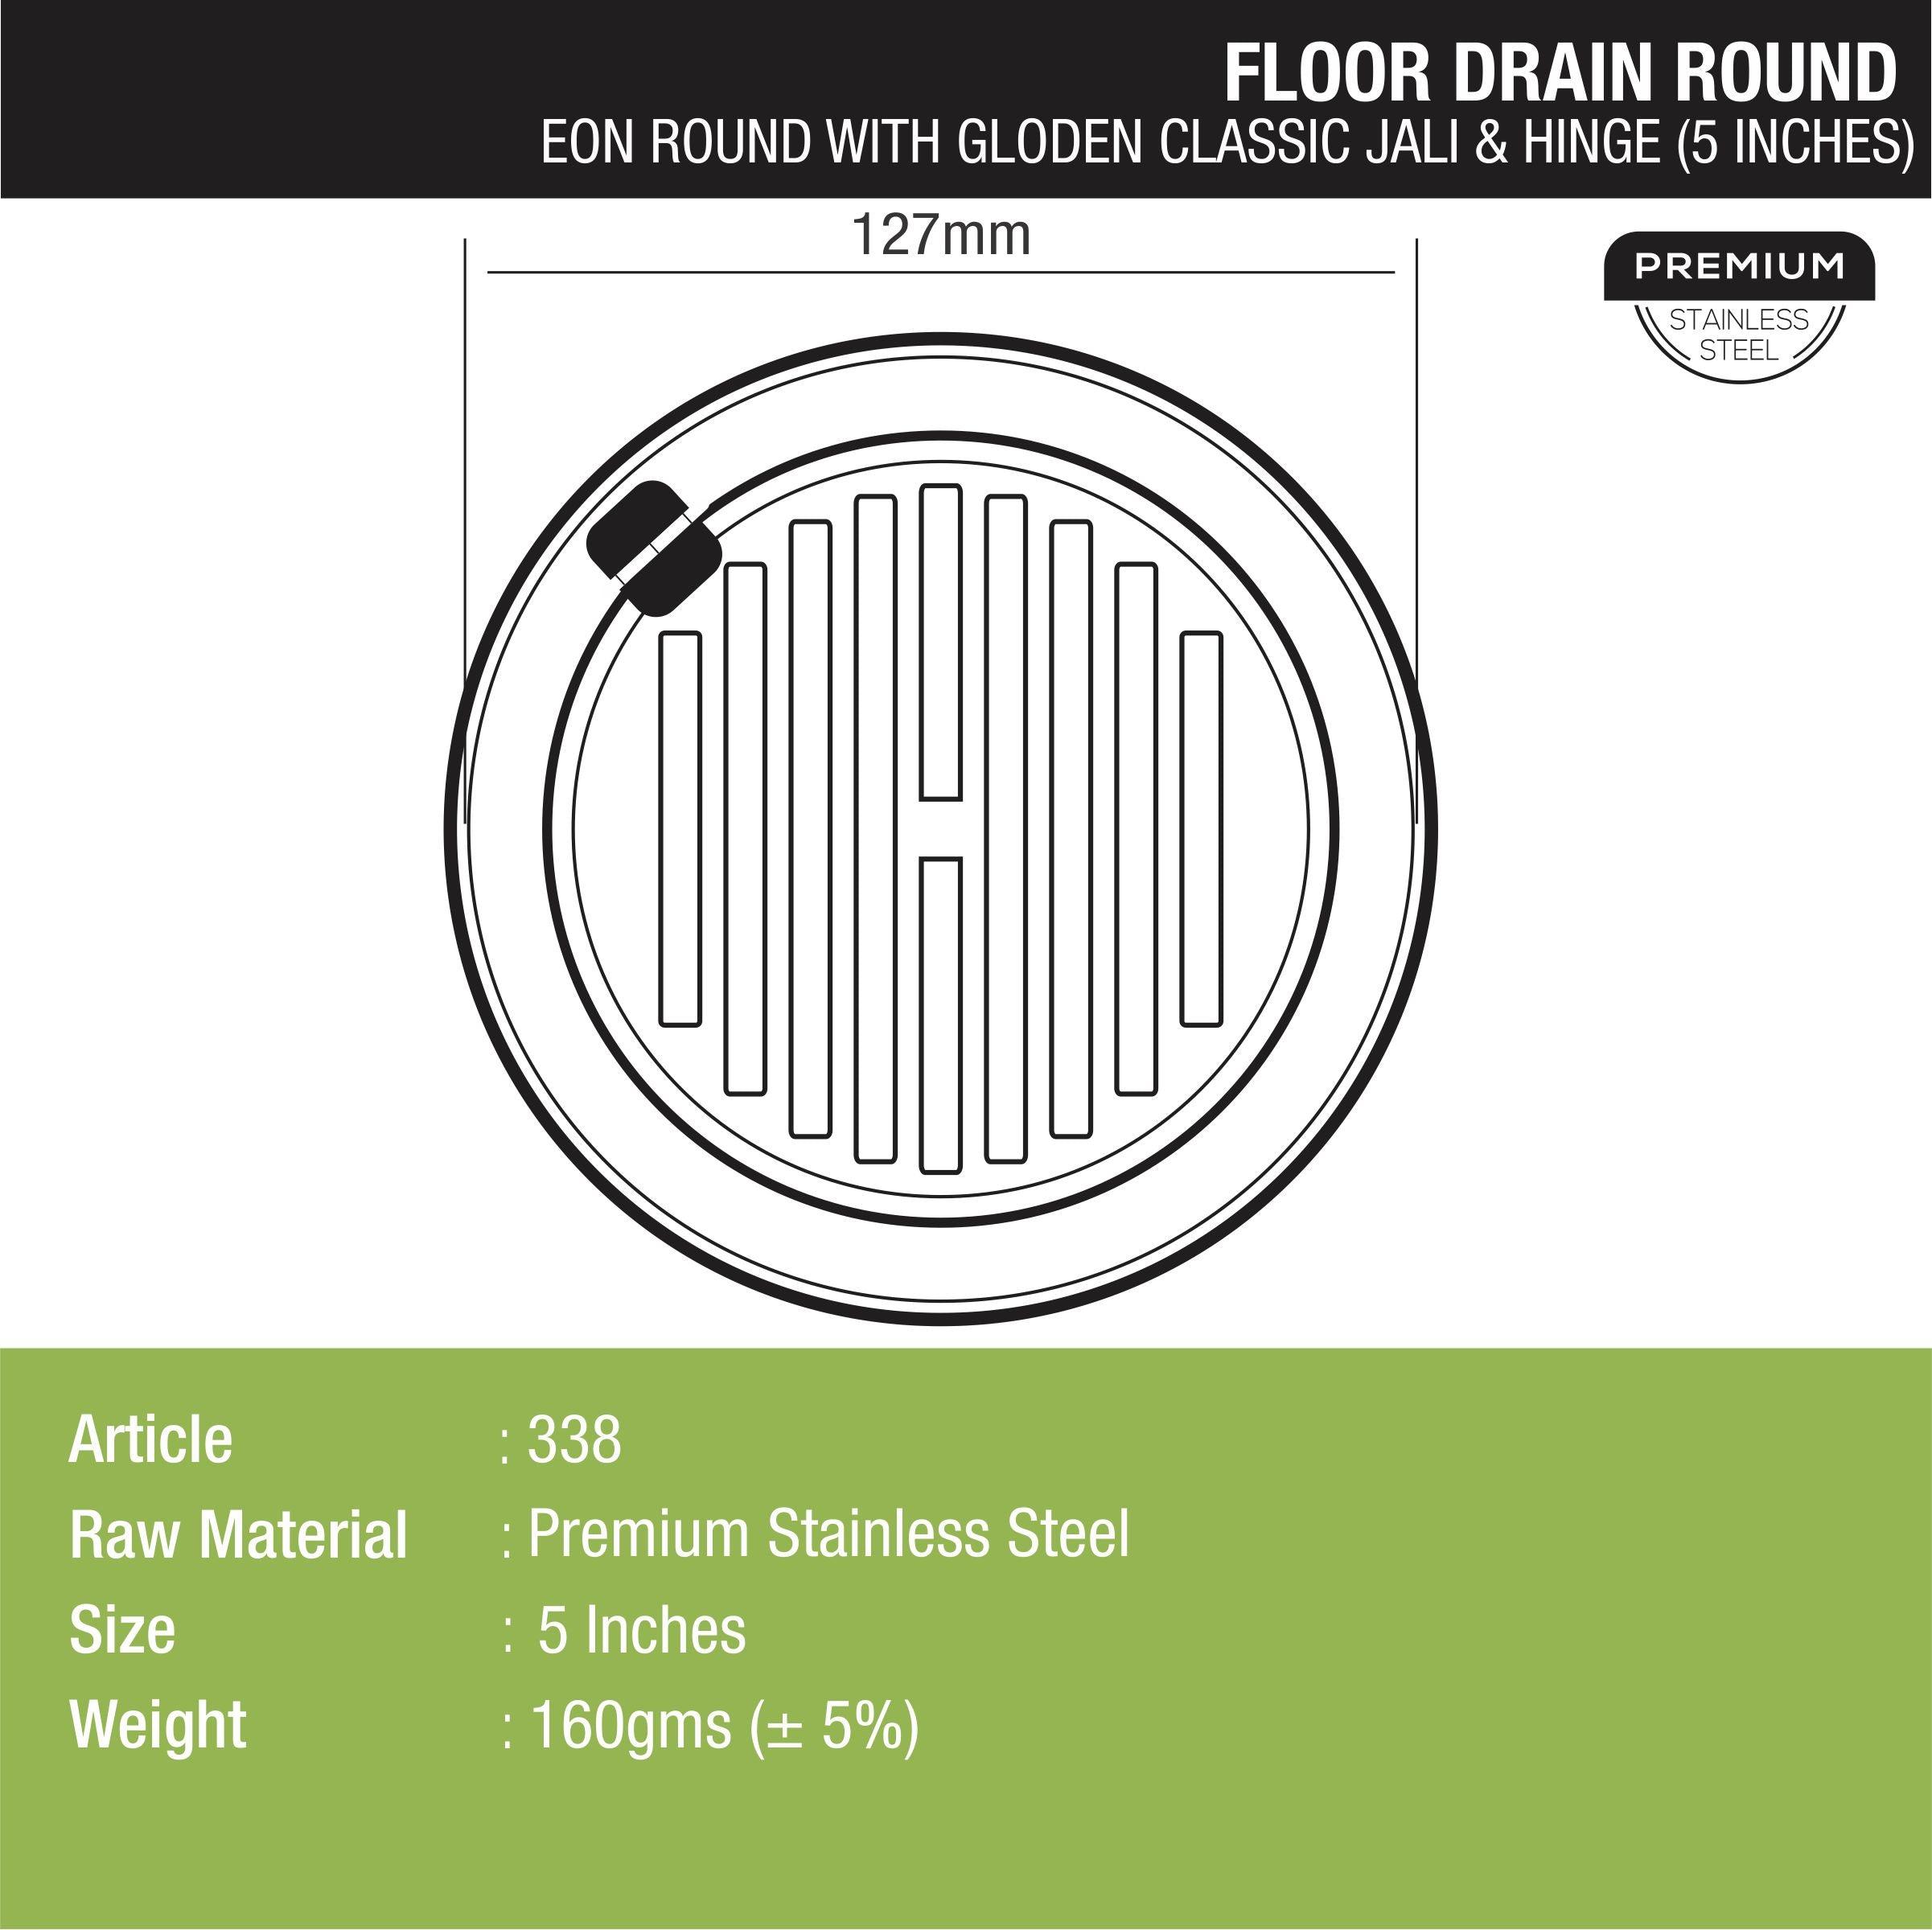 Eon Round Floor Drain with Golden Classic Jali & Hinge (5 inches) dimensions and sizes